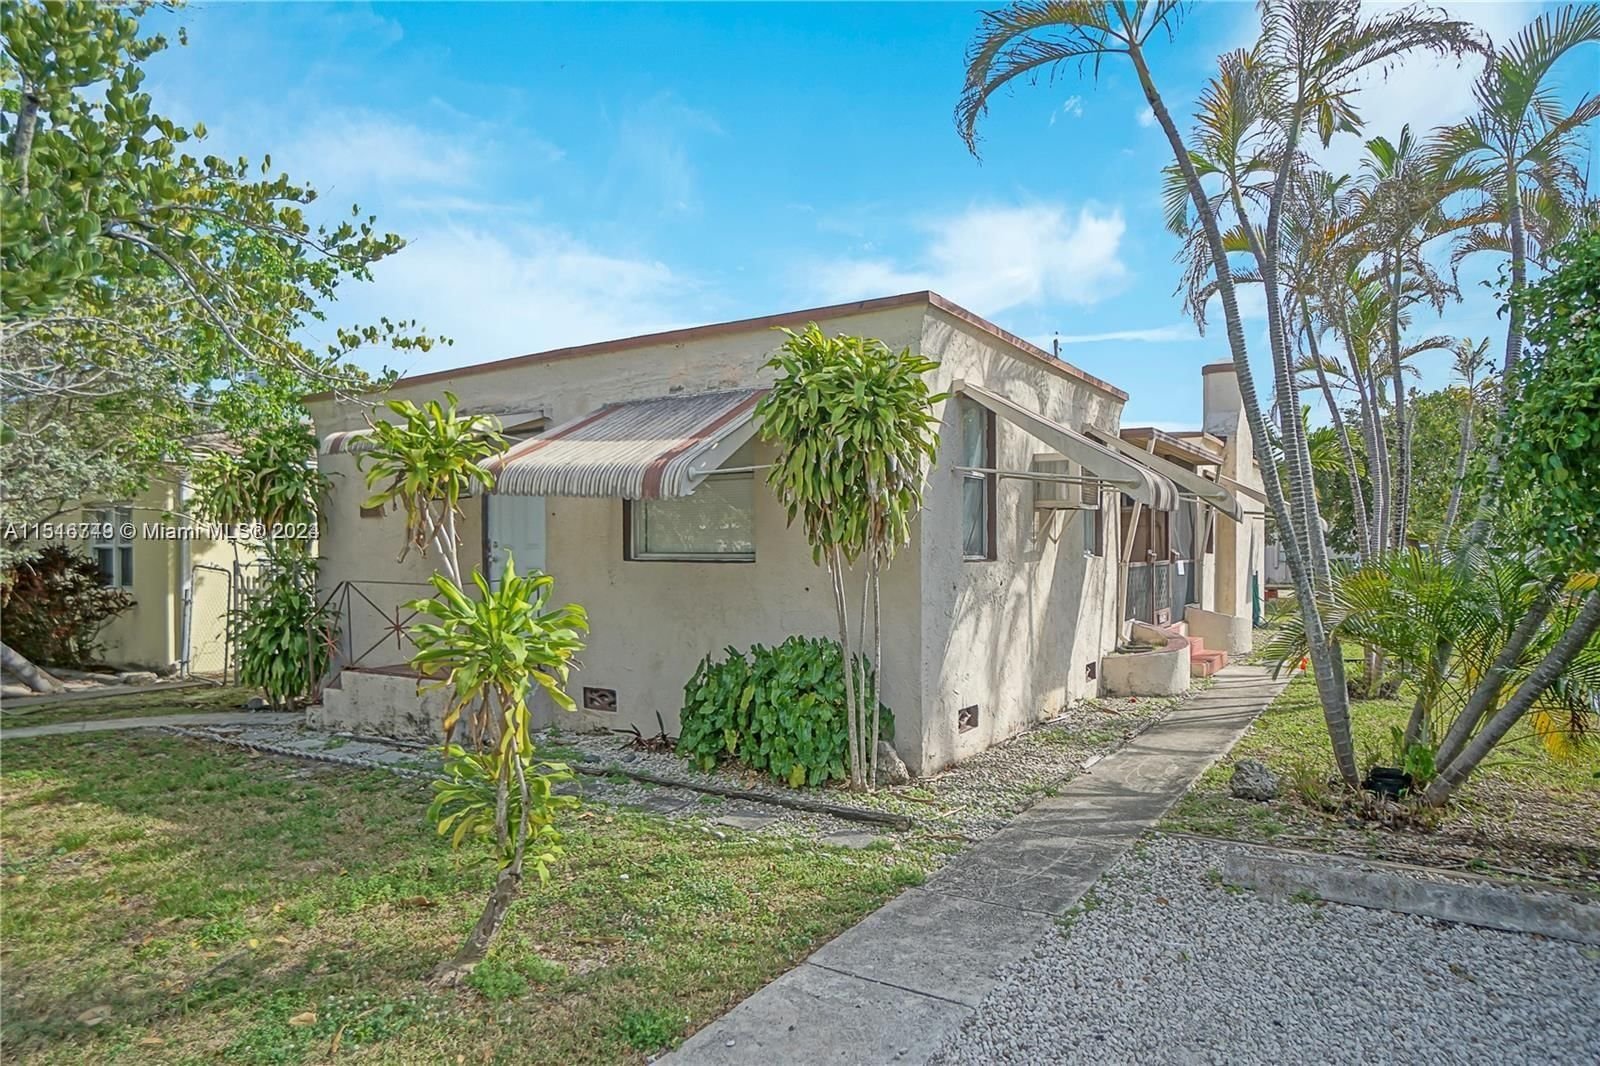 Real estate property located at 1952 Fillmore St, Broward County, Hollywood, Hollywood, FL